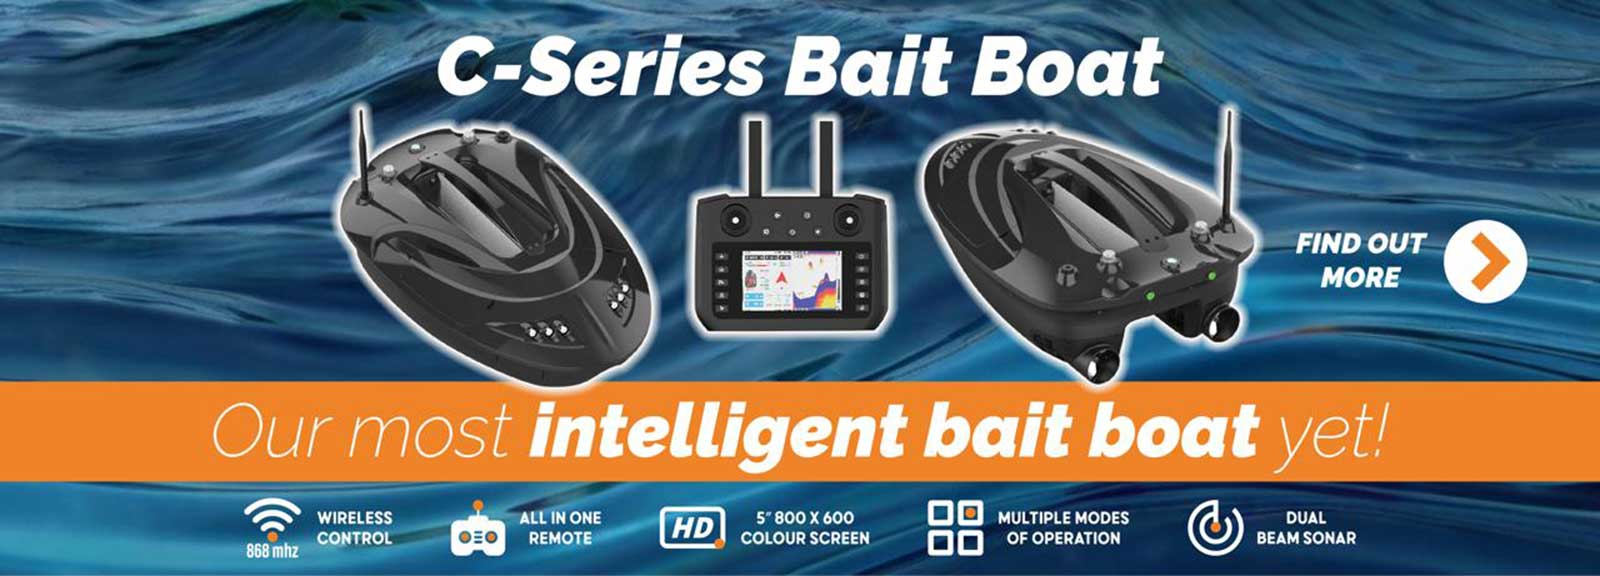 Get a C-Series Bait Boat Today